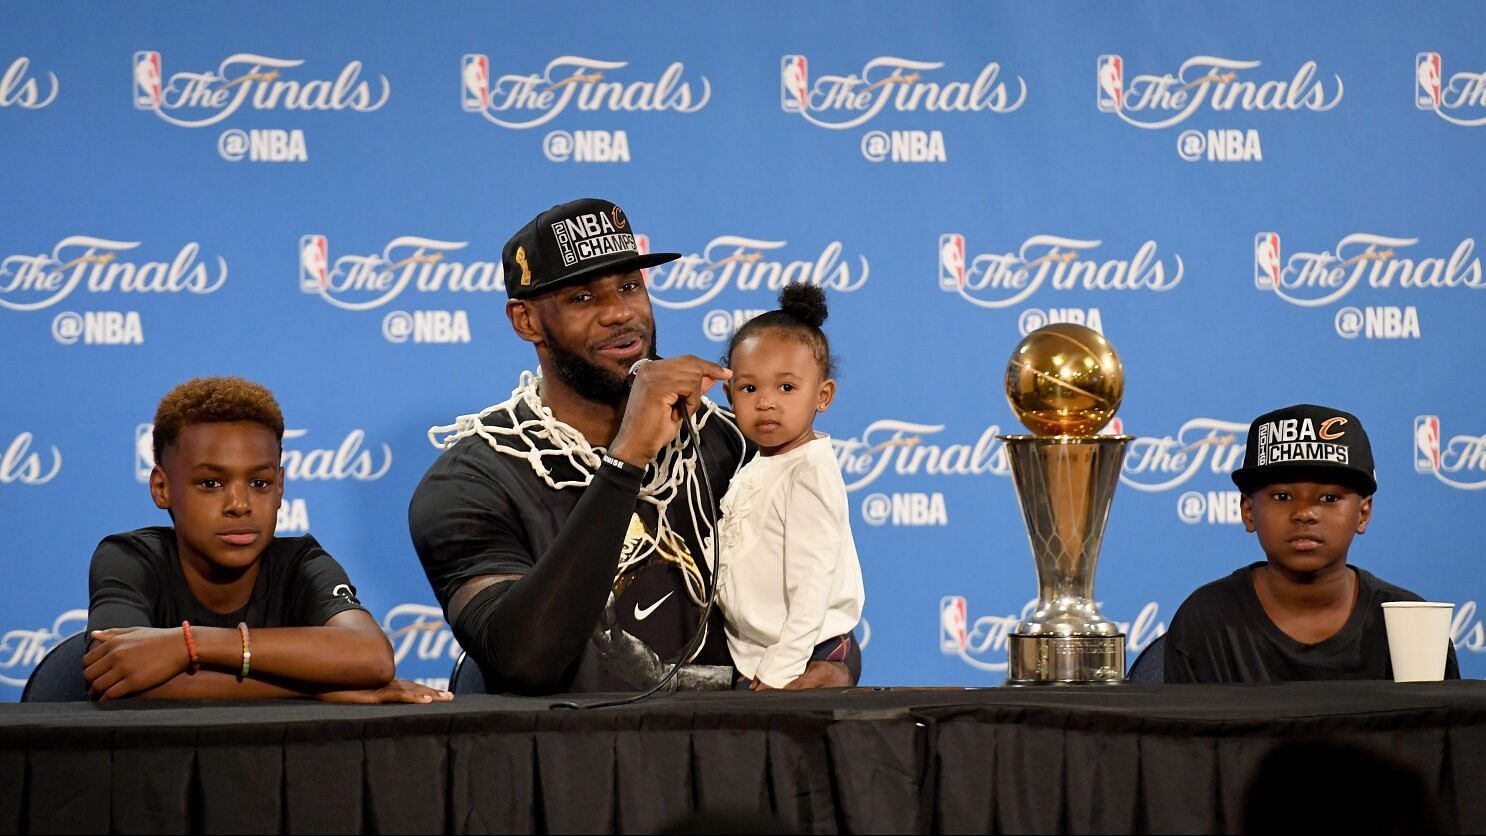 LeBron James and his kids back in 2016